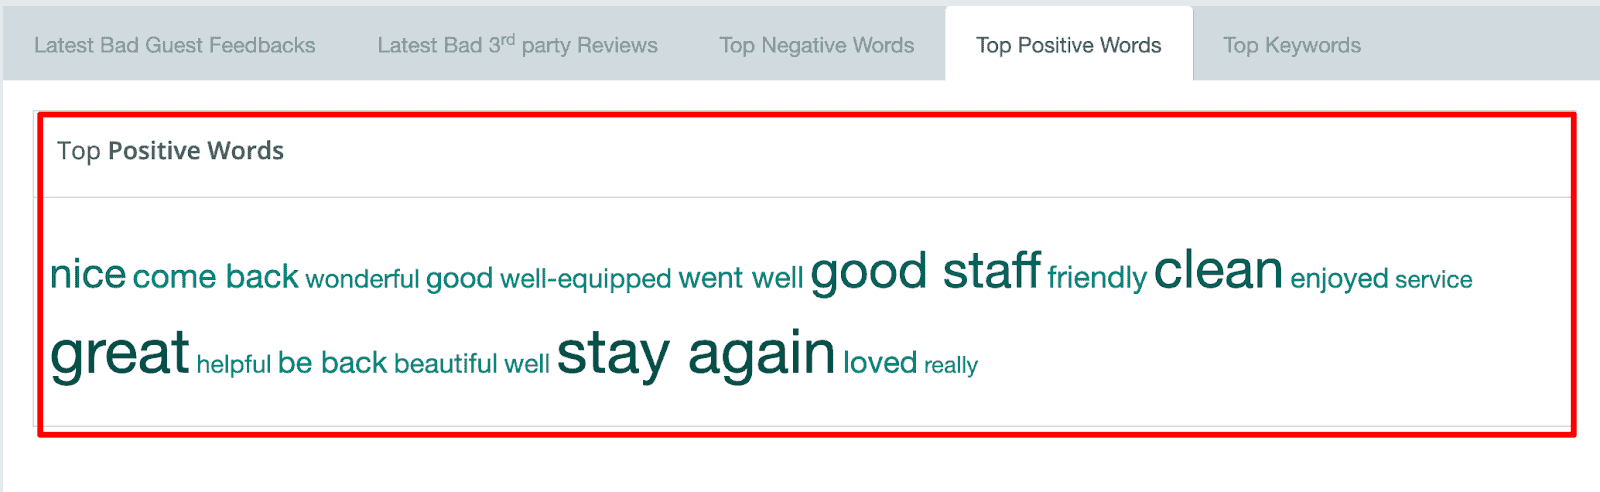 vacation rental client positive review keywords